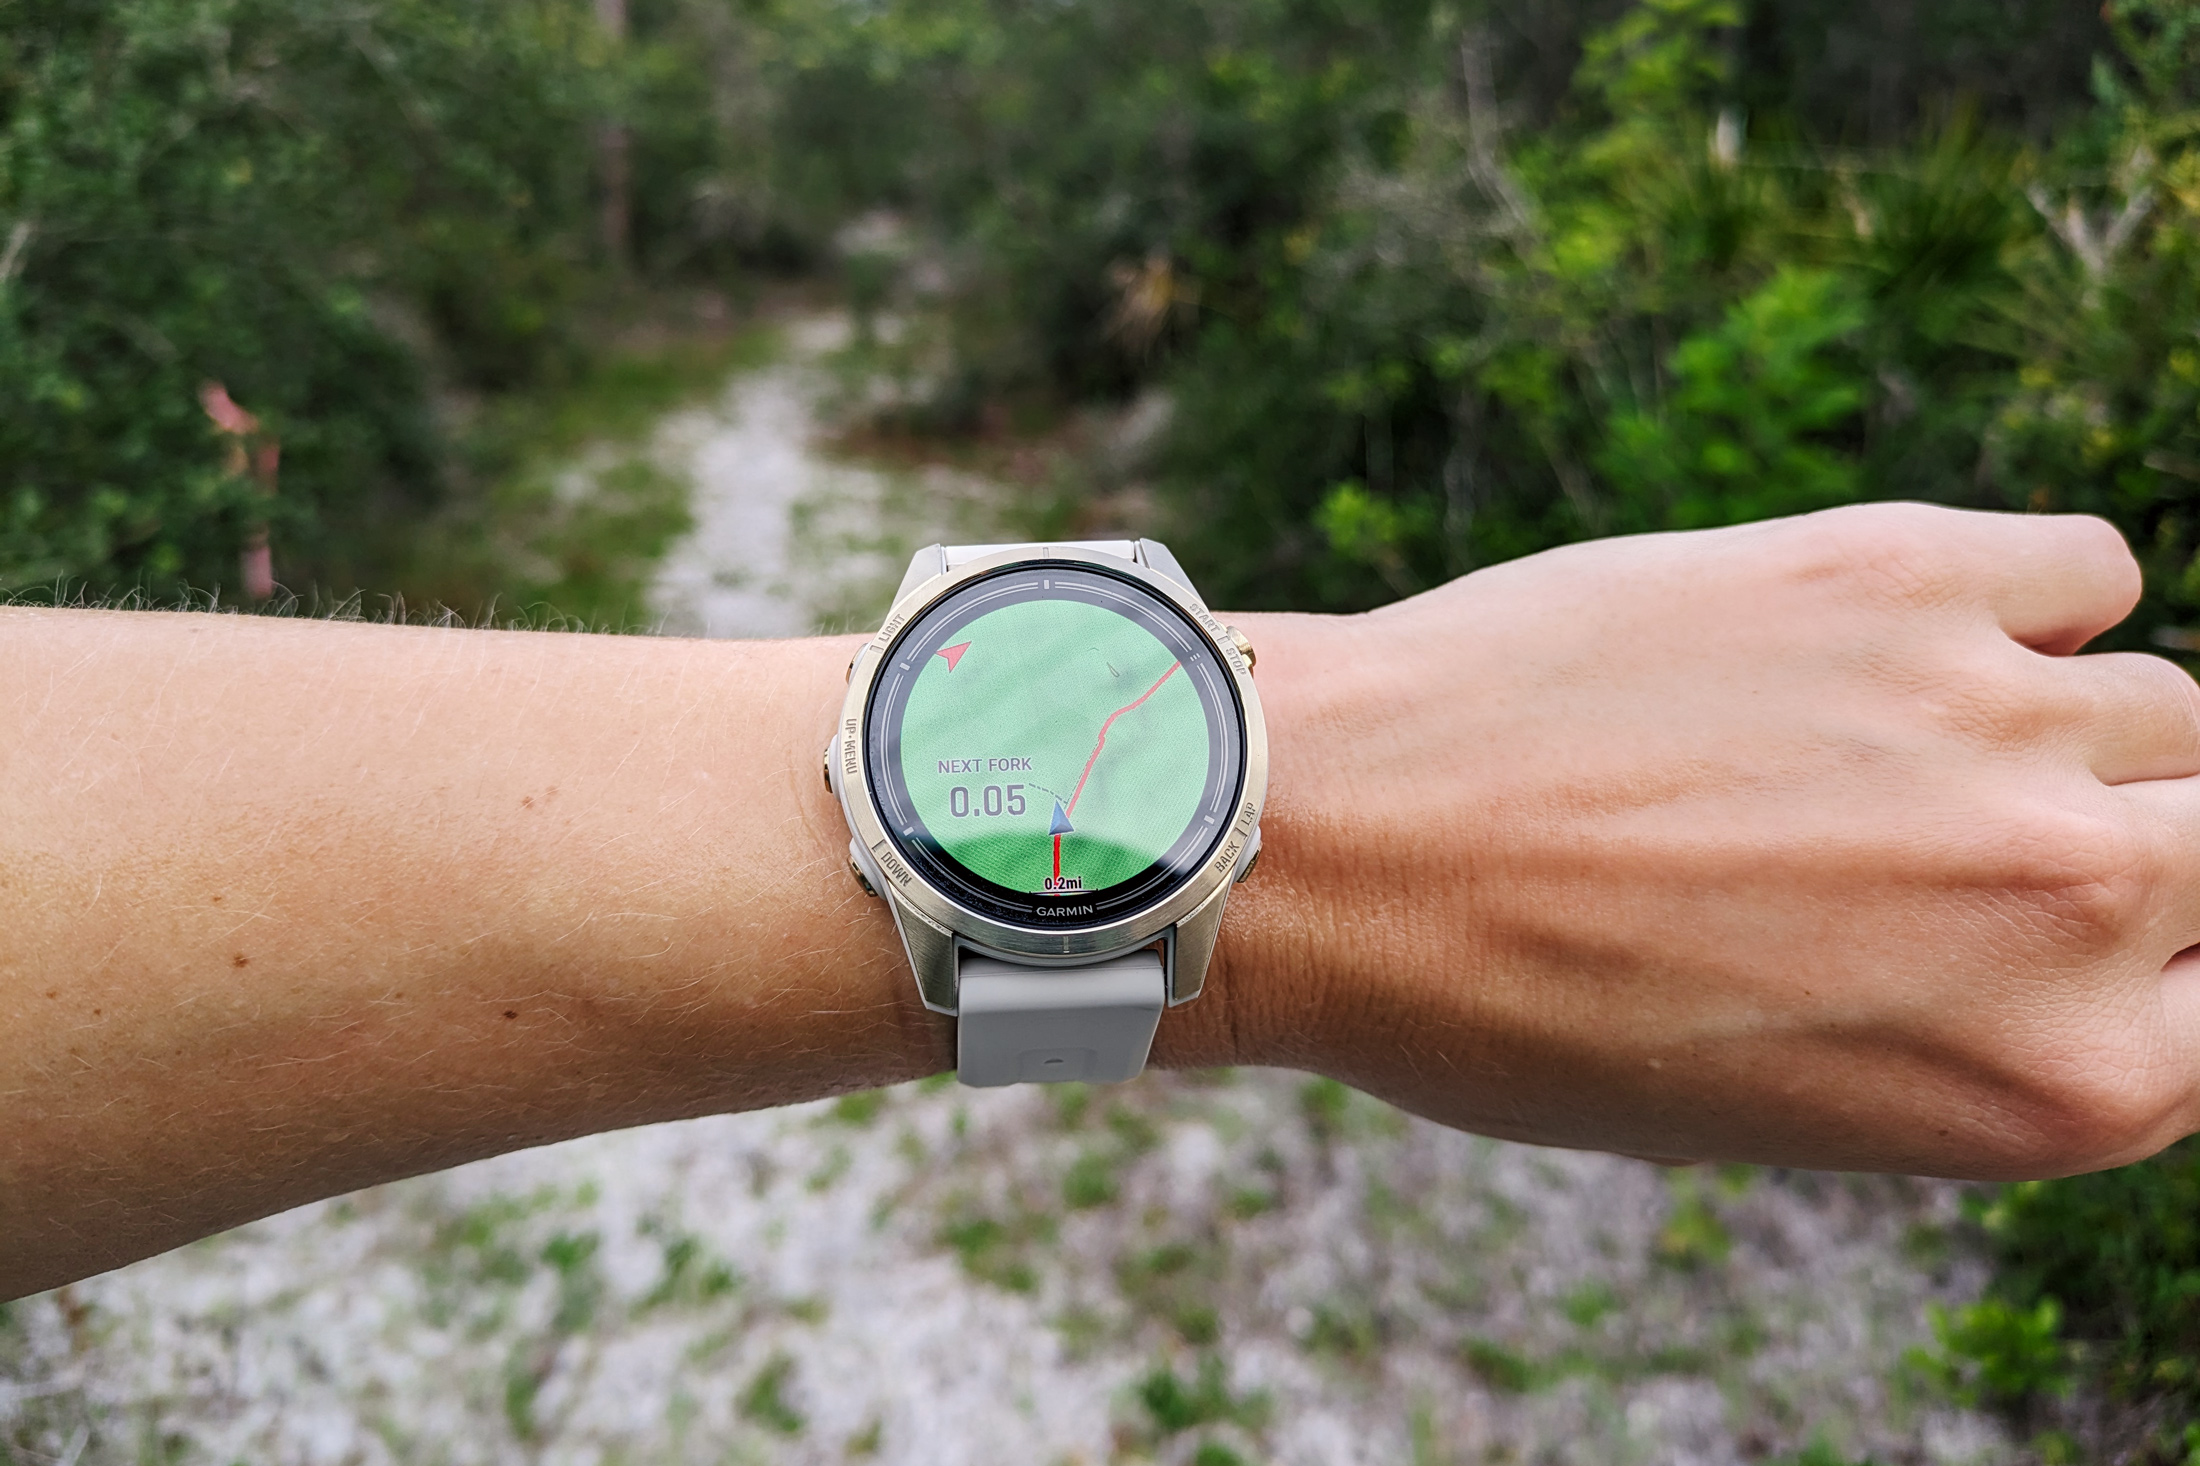 Garmin epix 2 Pro on a wrist in front of a trail through a forest